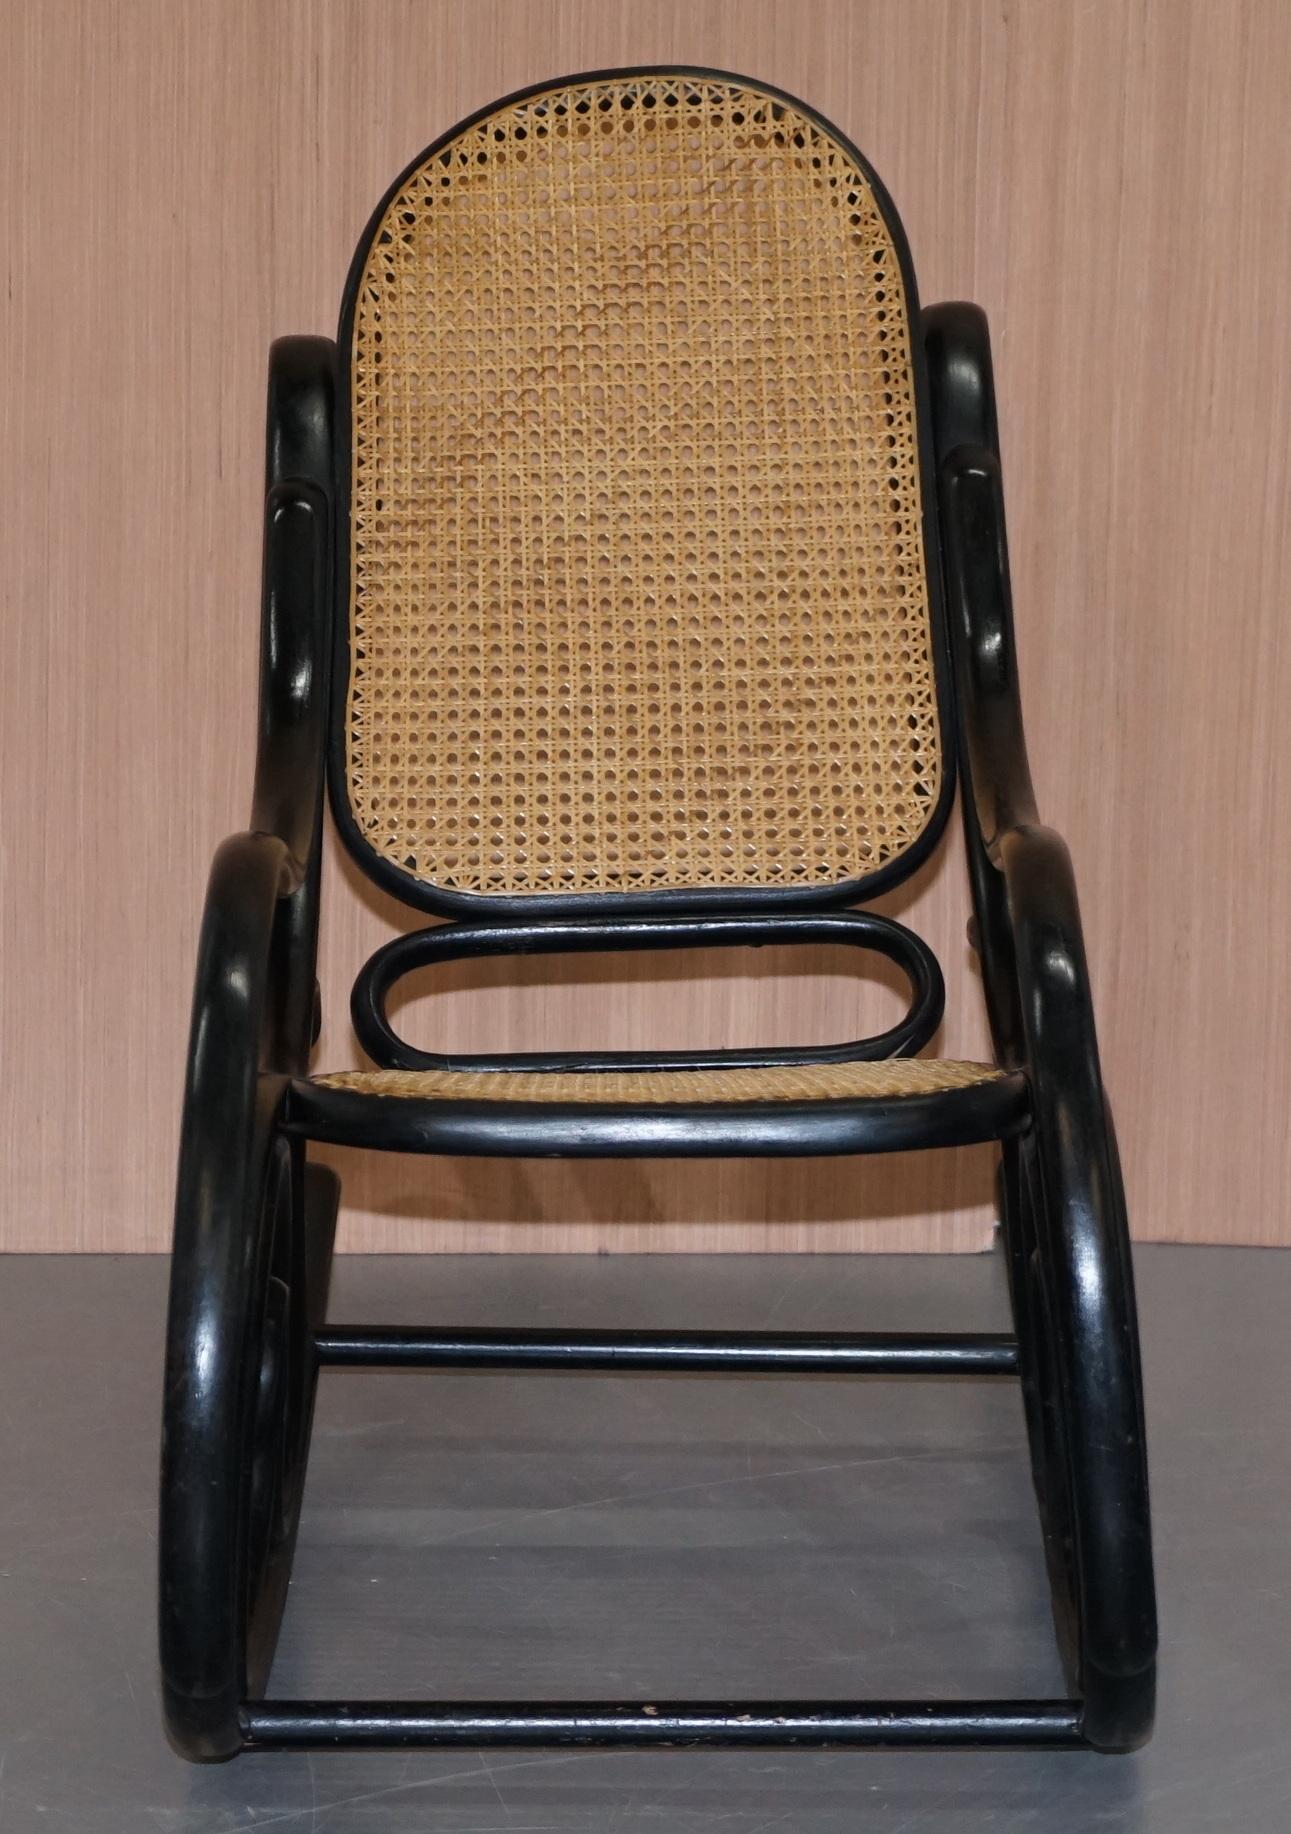 We are delighted to offer for sale this lovely small vintage Thonet Rocking armchair with ebonised black frame and rattan seat

Originally designed in the 1800s with elaborate curves and handwoven cane seat and back, this chair is an iconic piece